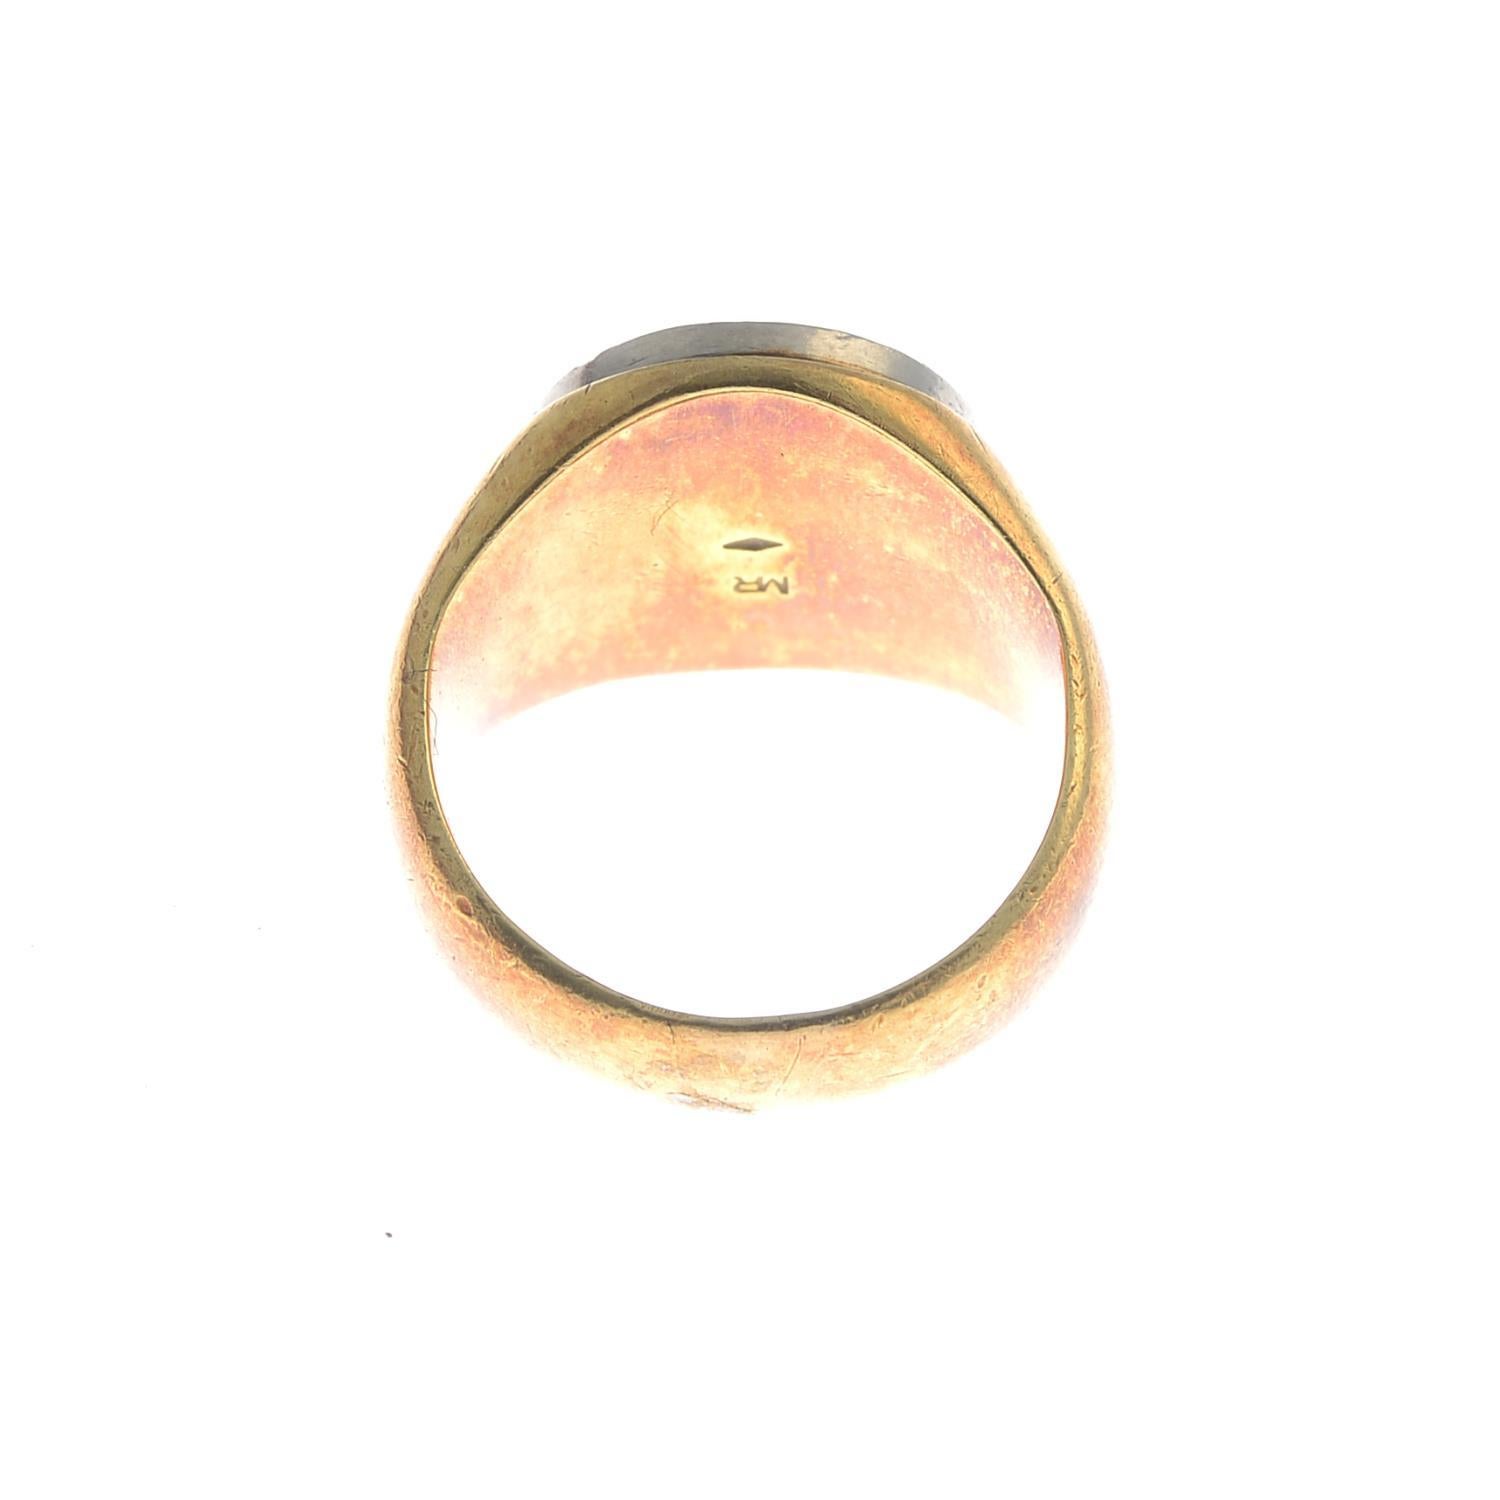 A signet ring, with family crest. Ring size 6 1/4. Weight : 10.1gms.